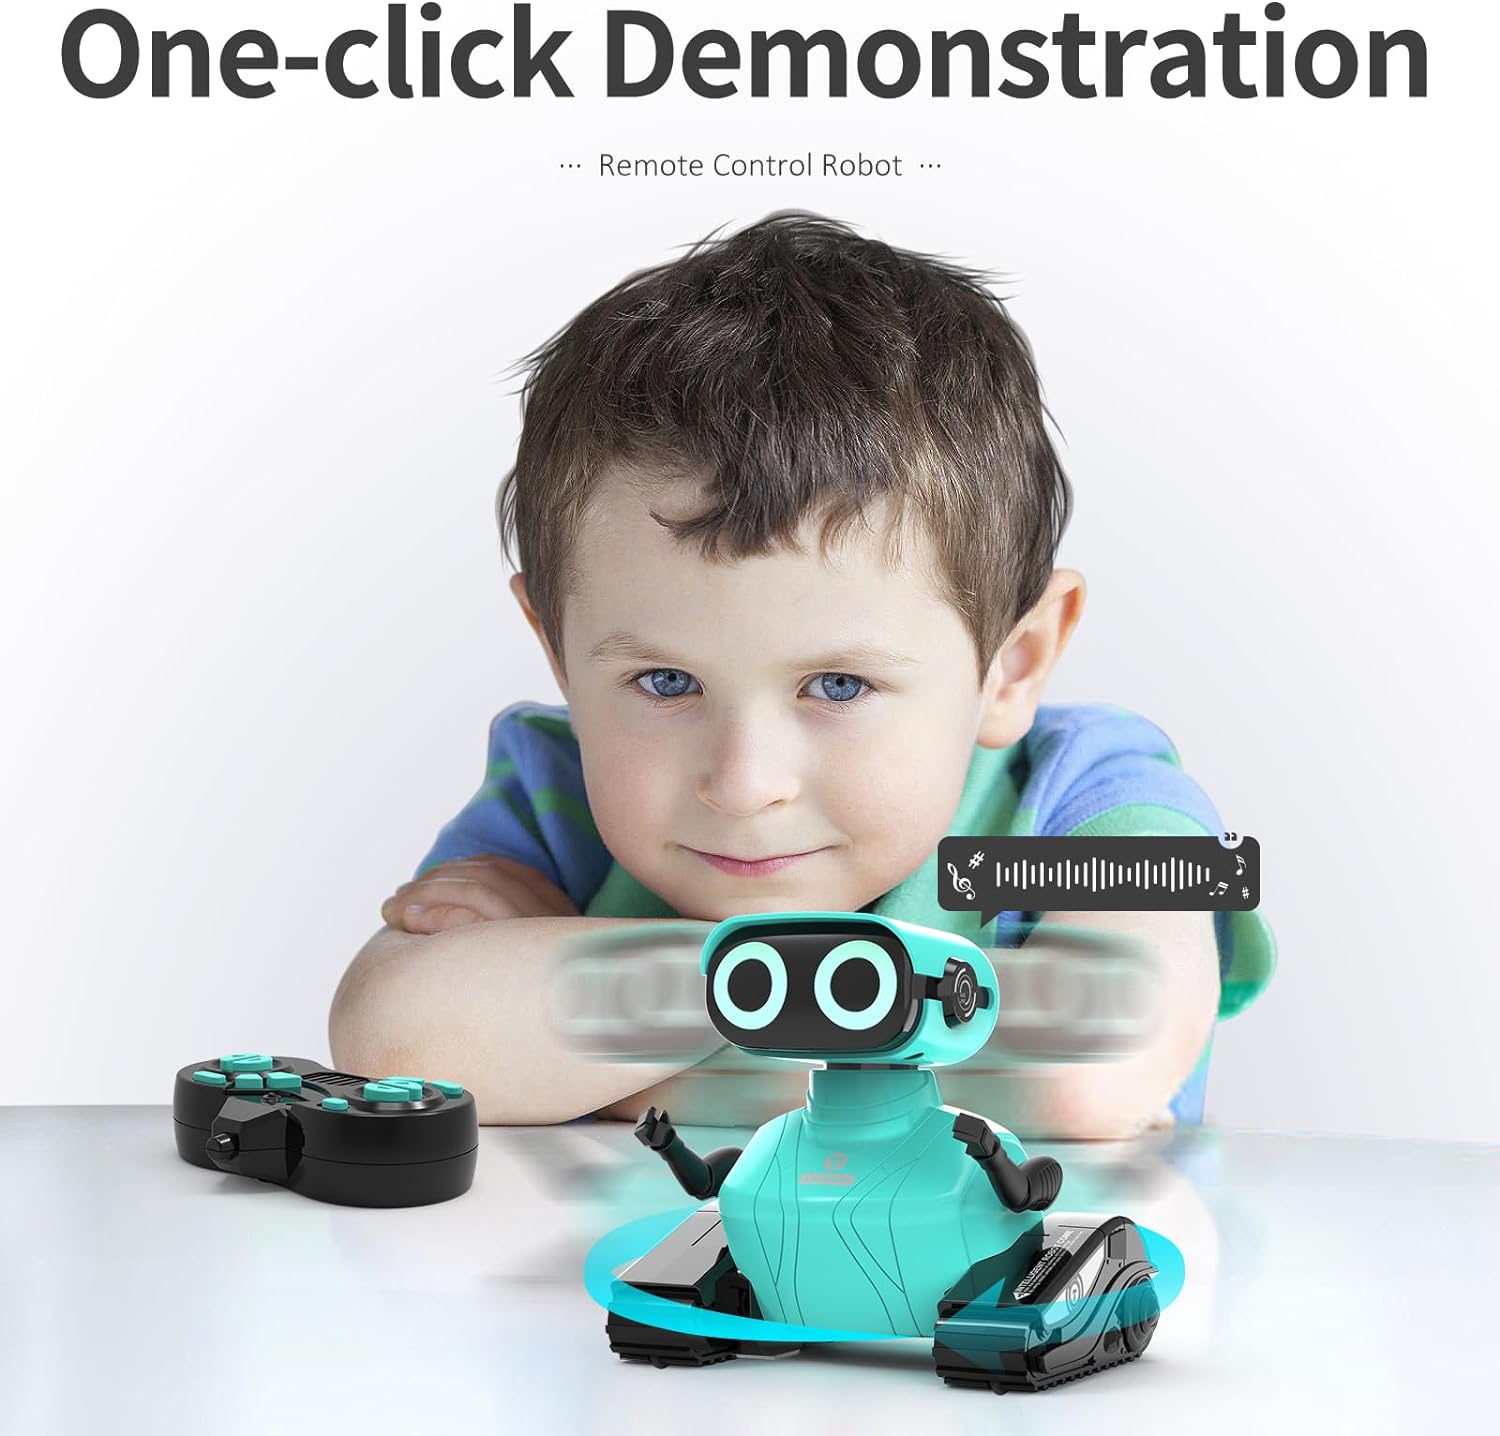 Robot Toys, Remote Control Robot Toy, RC Robots for Kids with LED Eyes, Flexible Head & Arms, Dance Moves and Music